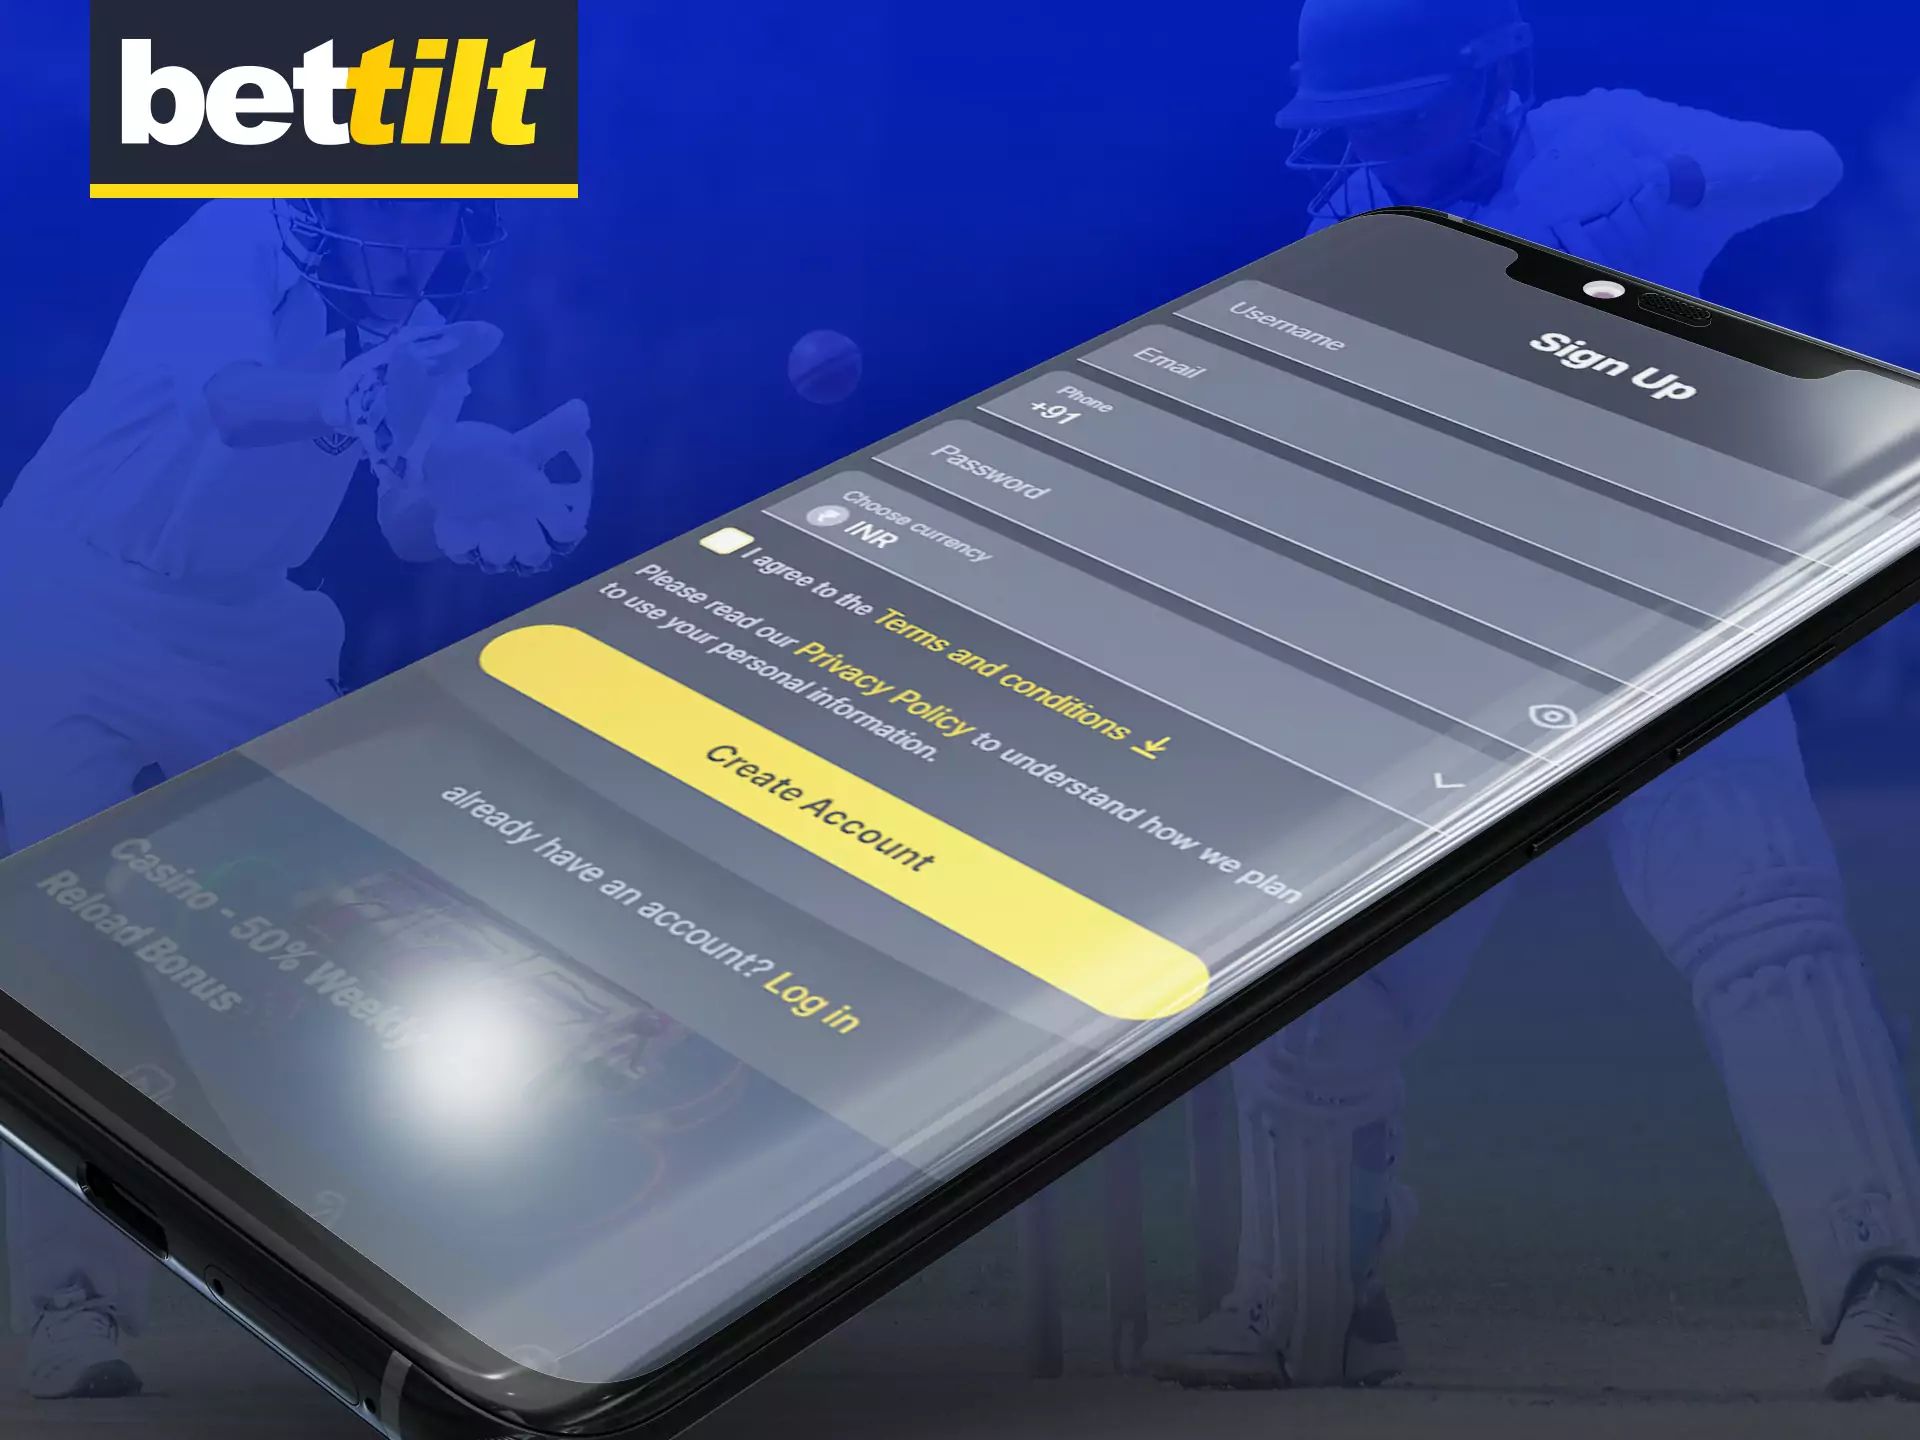 Register with the Bettilt app to start betting.